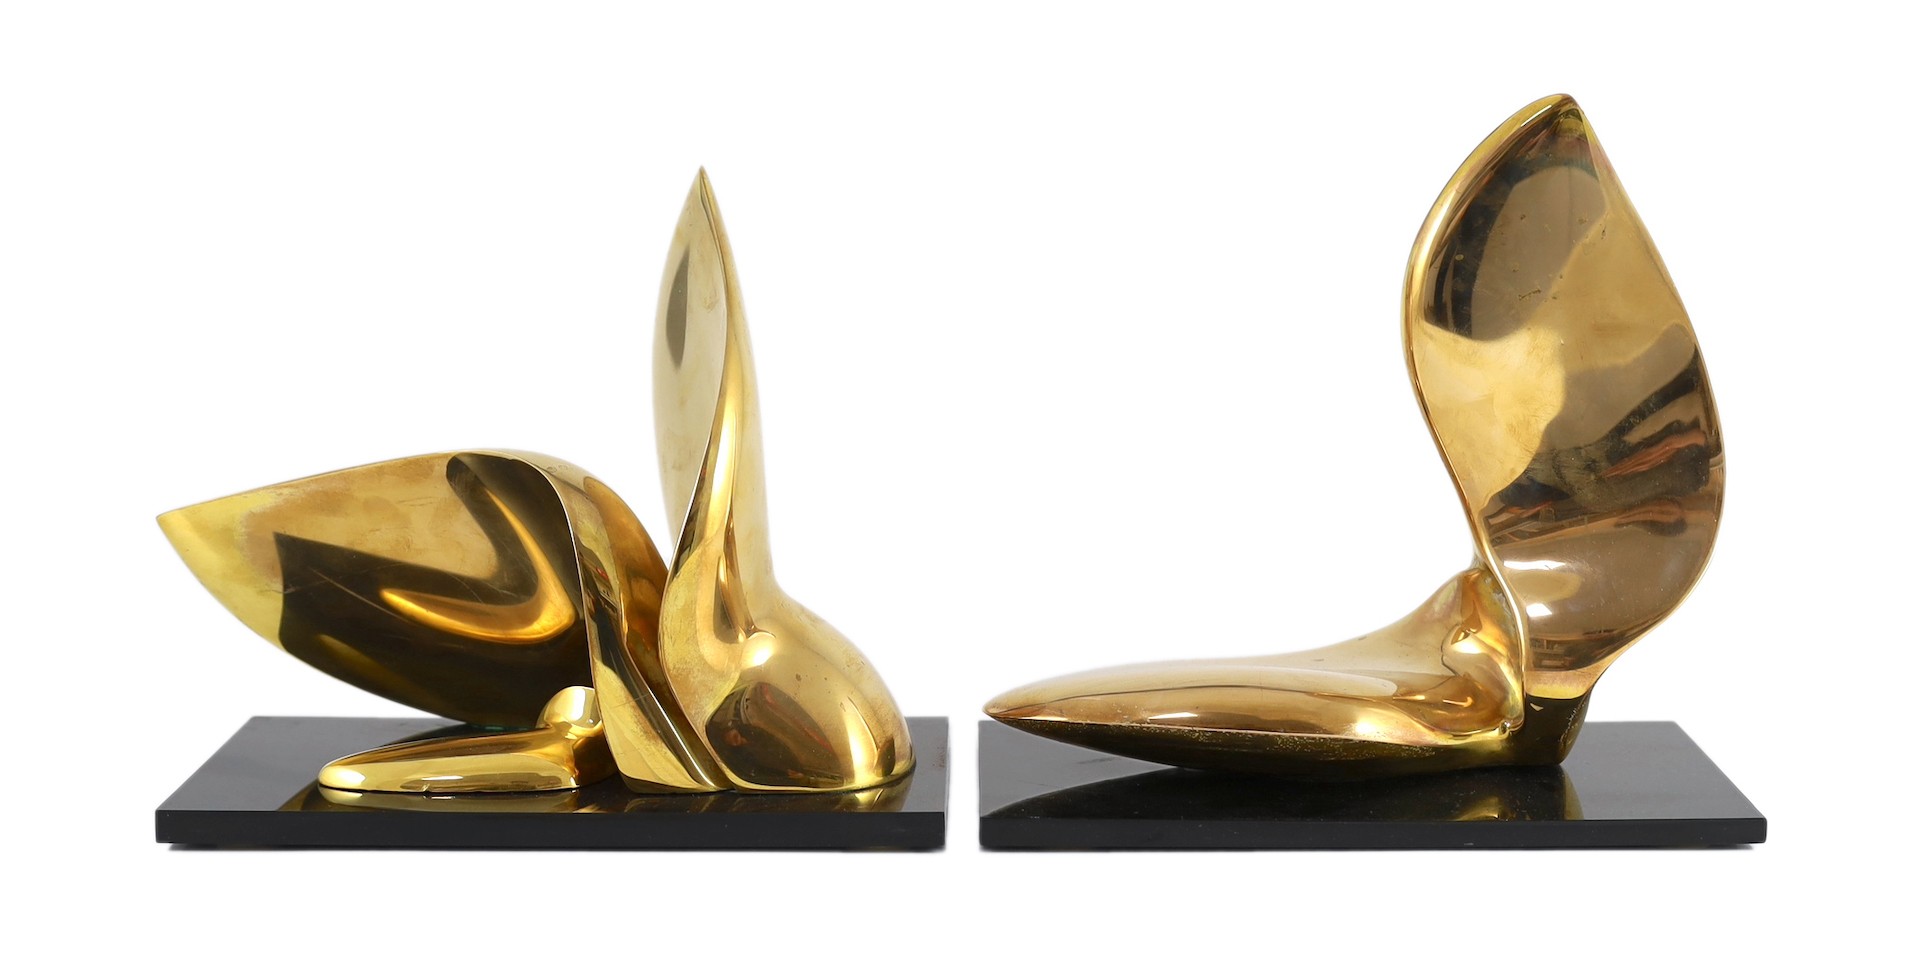 Jack Zajac (American, b.1929). A pair of bronze abstract sculptures, 28cm long, 22cm high